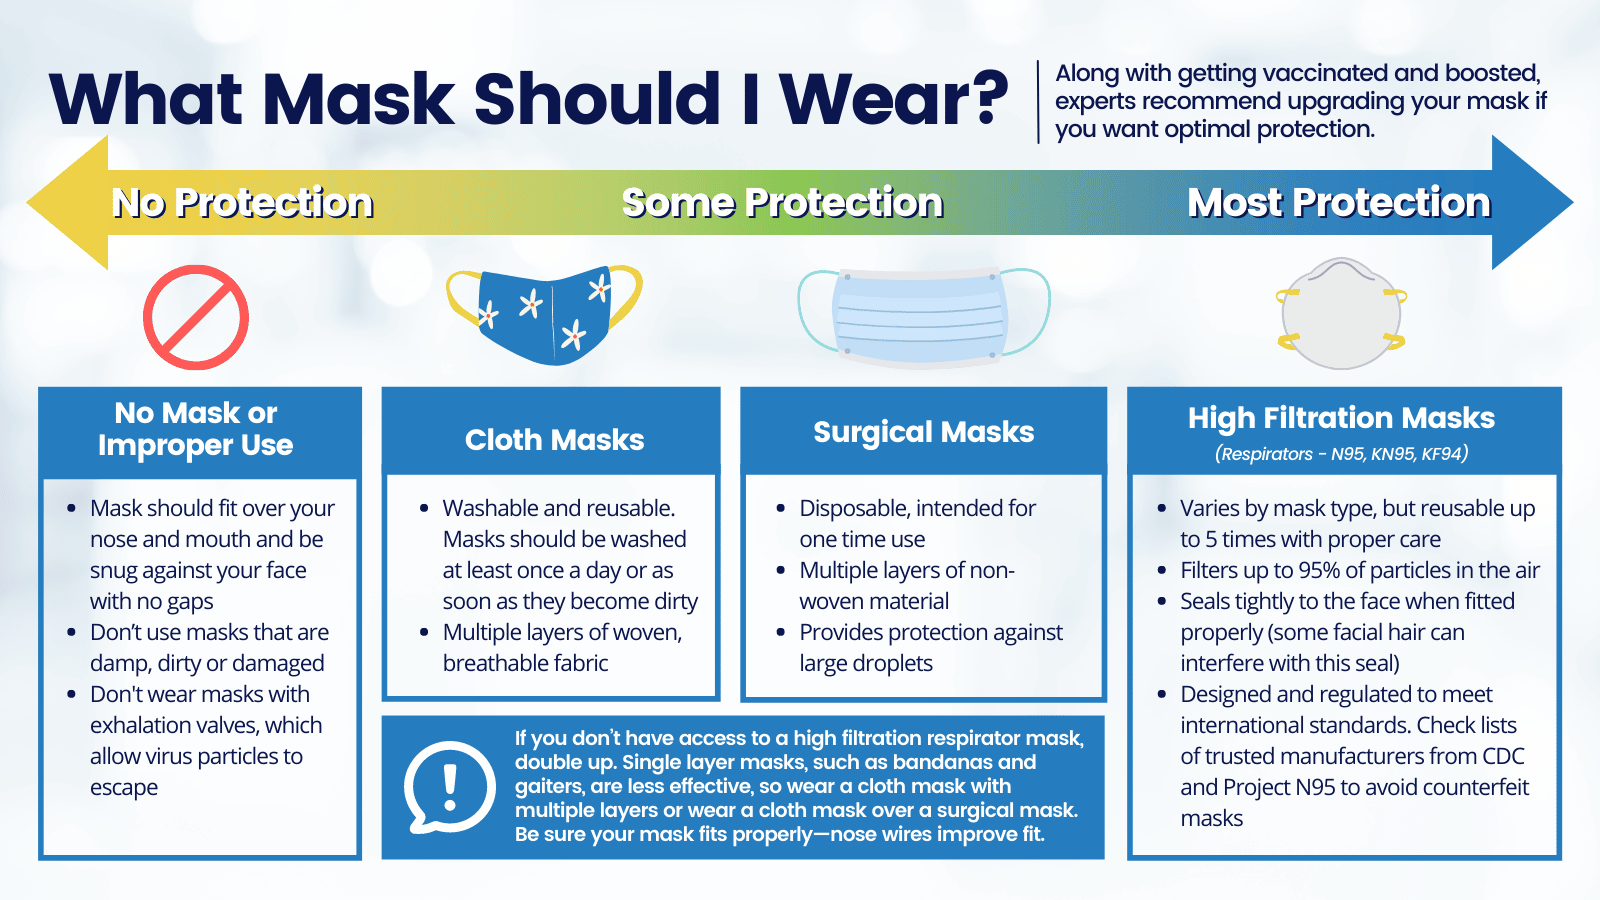 Shareable Graphic: What Mask Should I Wear?